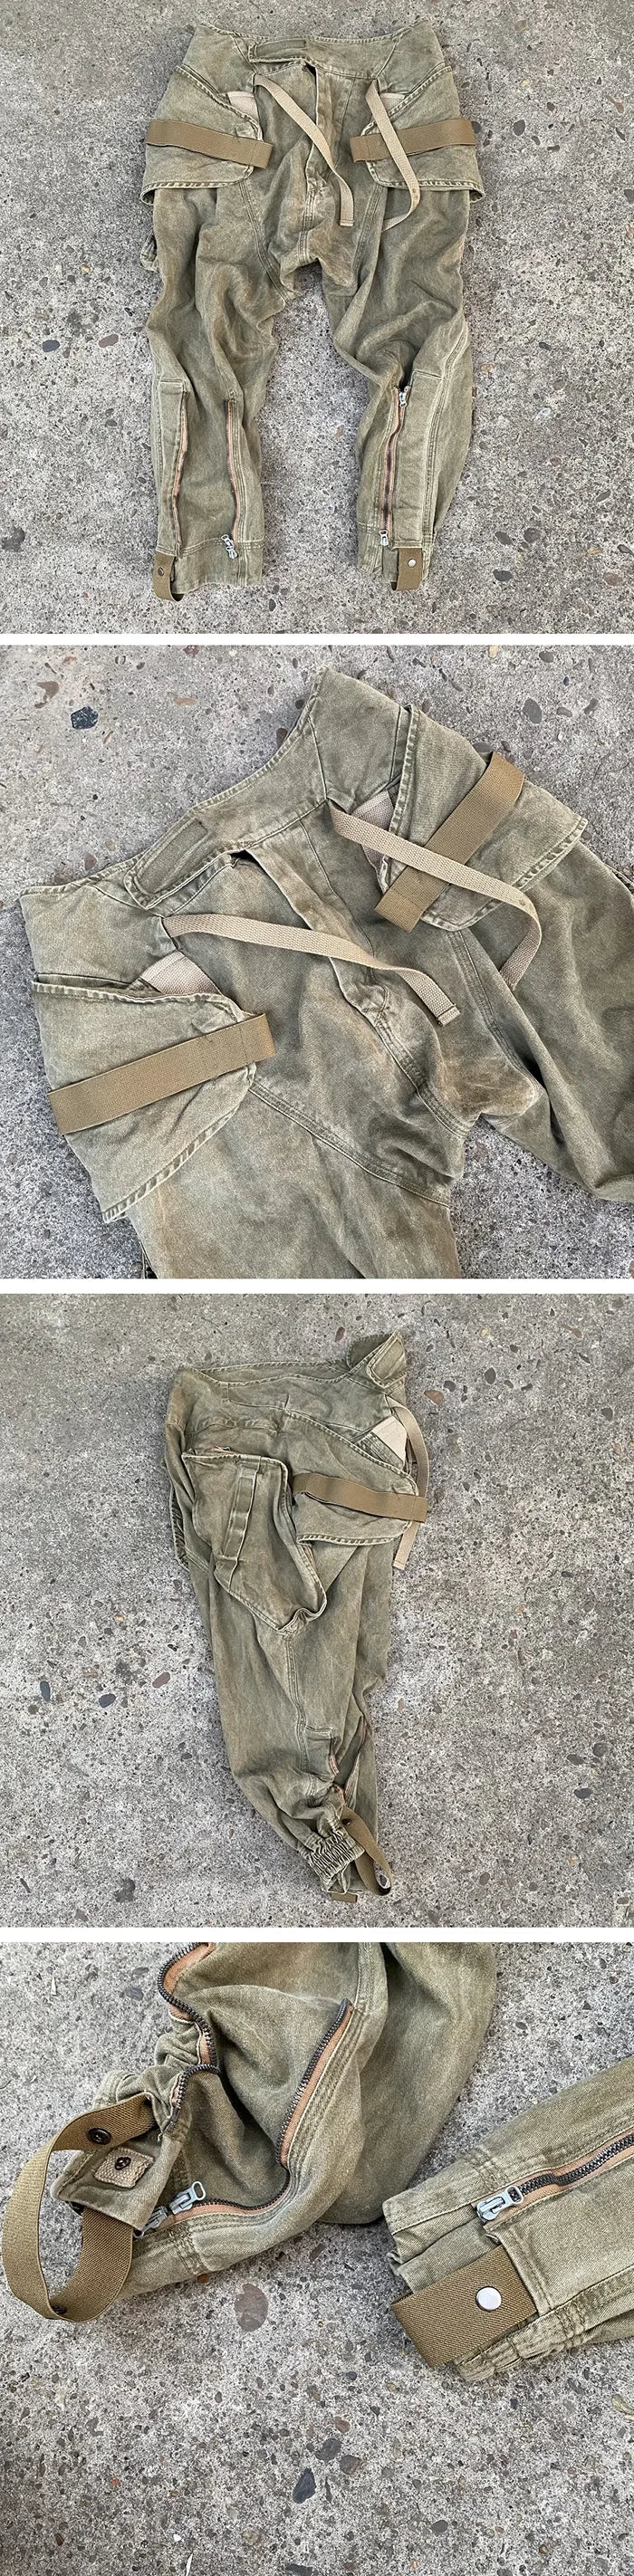 details of the Post apocalyptic pants "Kehara"